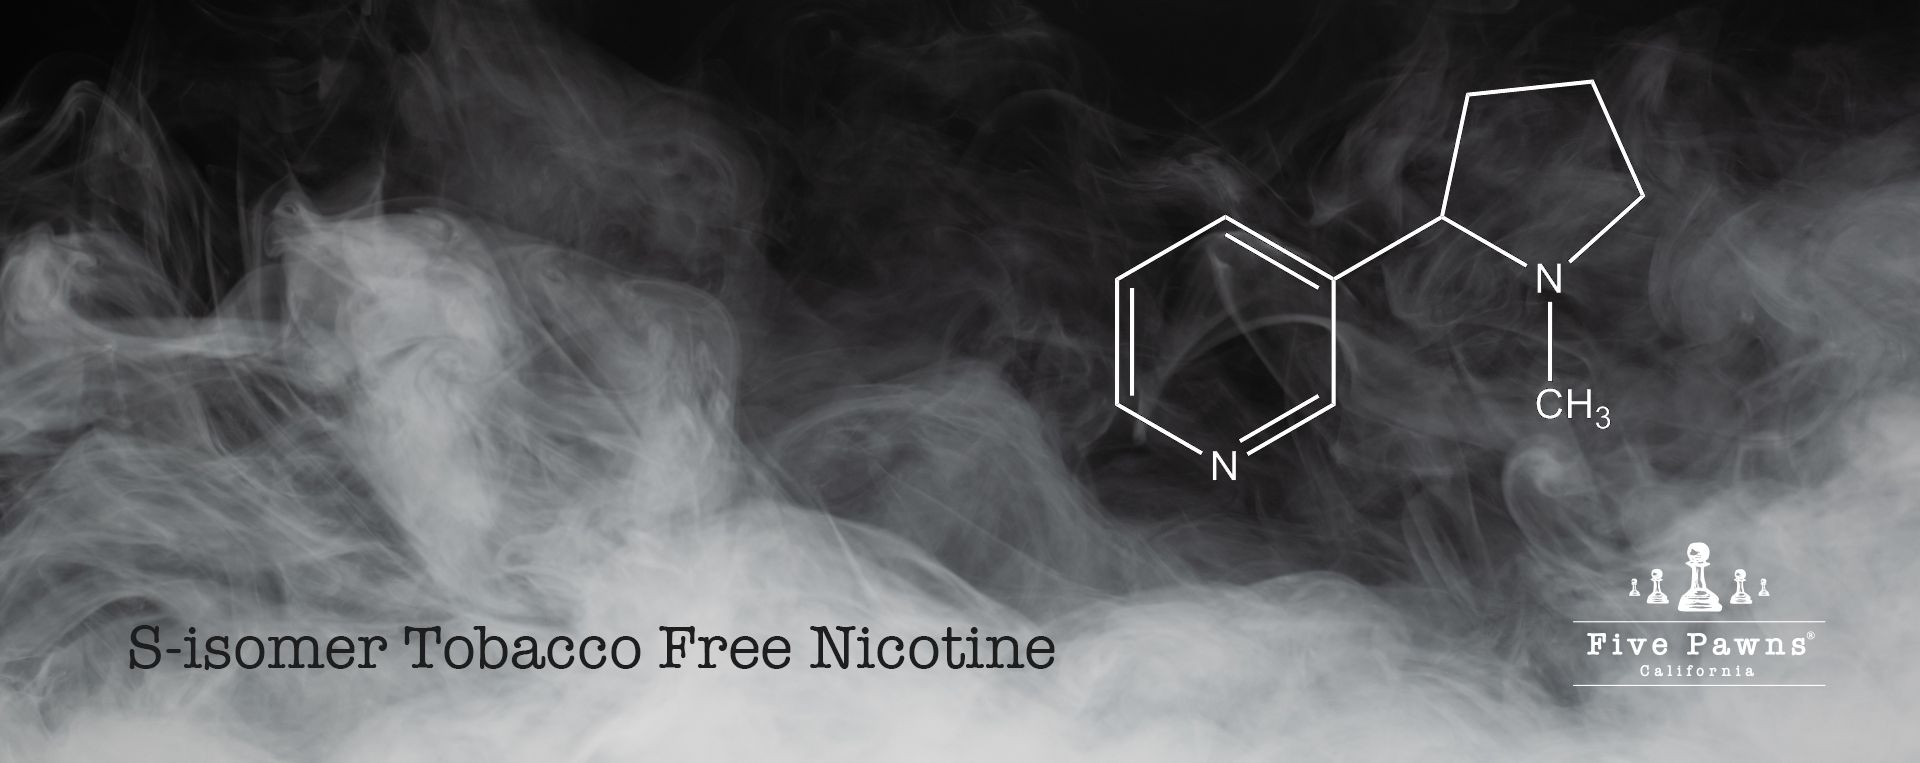 S-isomer, the purest form of tobacco free nicotine